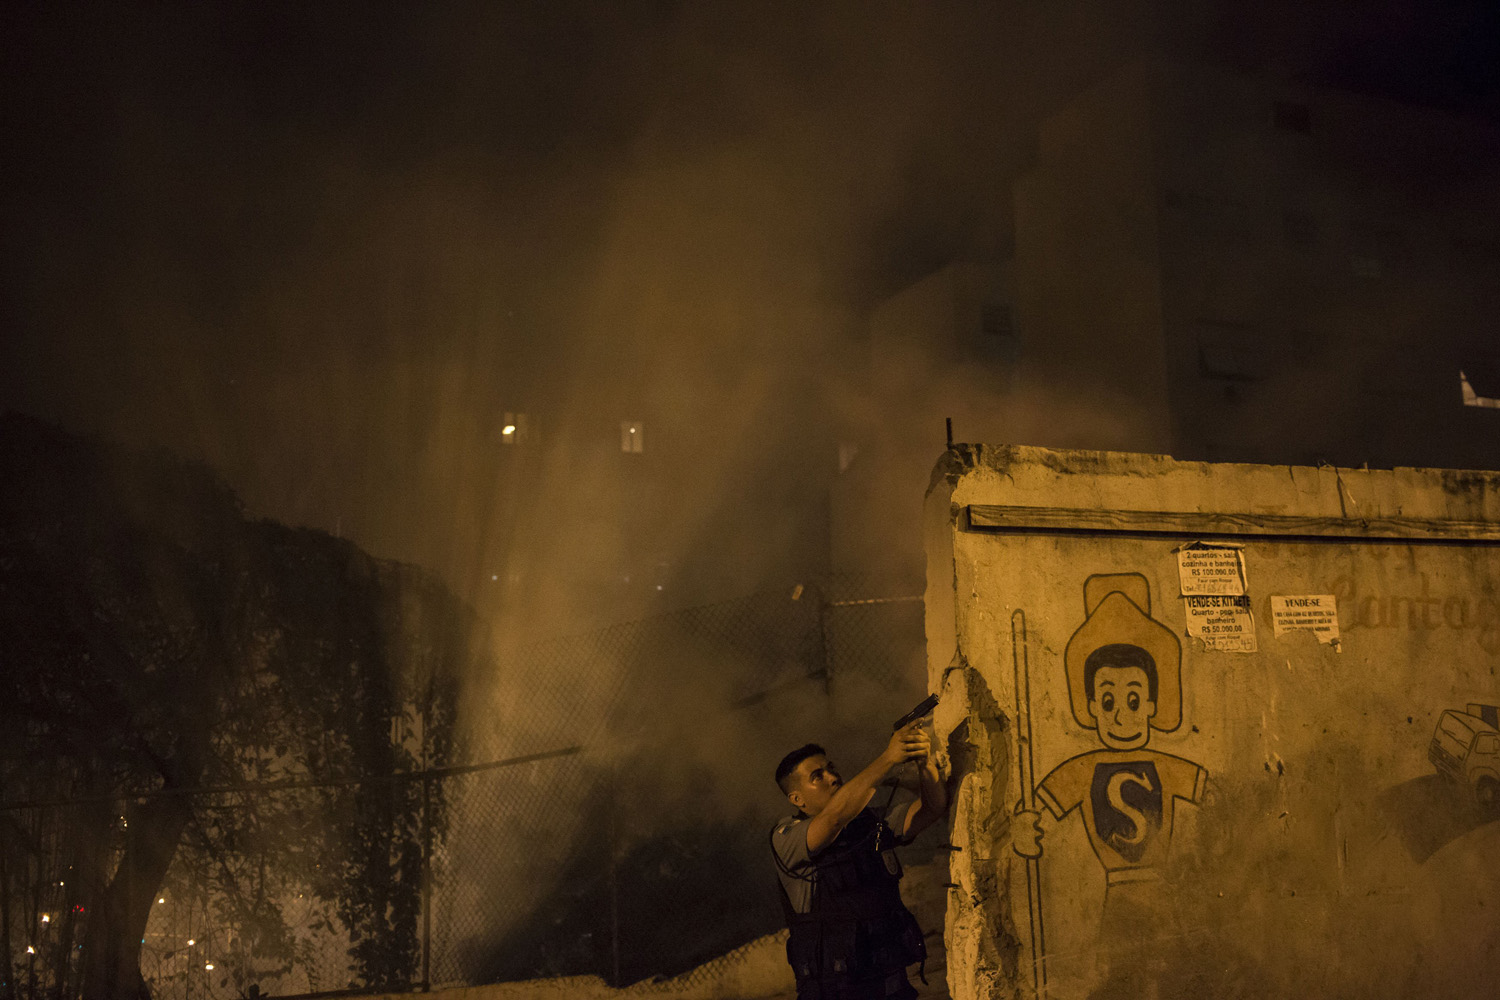 Apr. 22, 2014. A Police officer of the Pacifying Police Unit, patrols among the smoke from burning barricades during clashes at the Pavao Pavaozinho slum in Rio de Janeiro, Brazil.